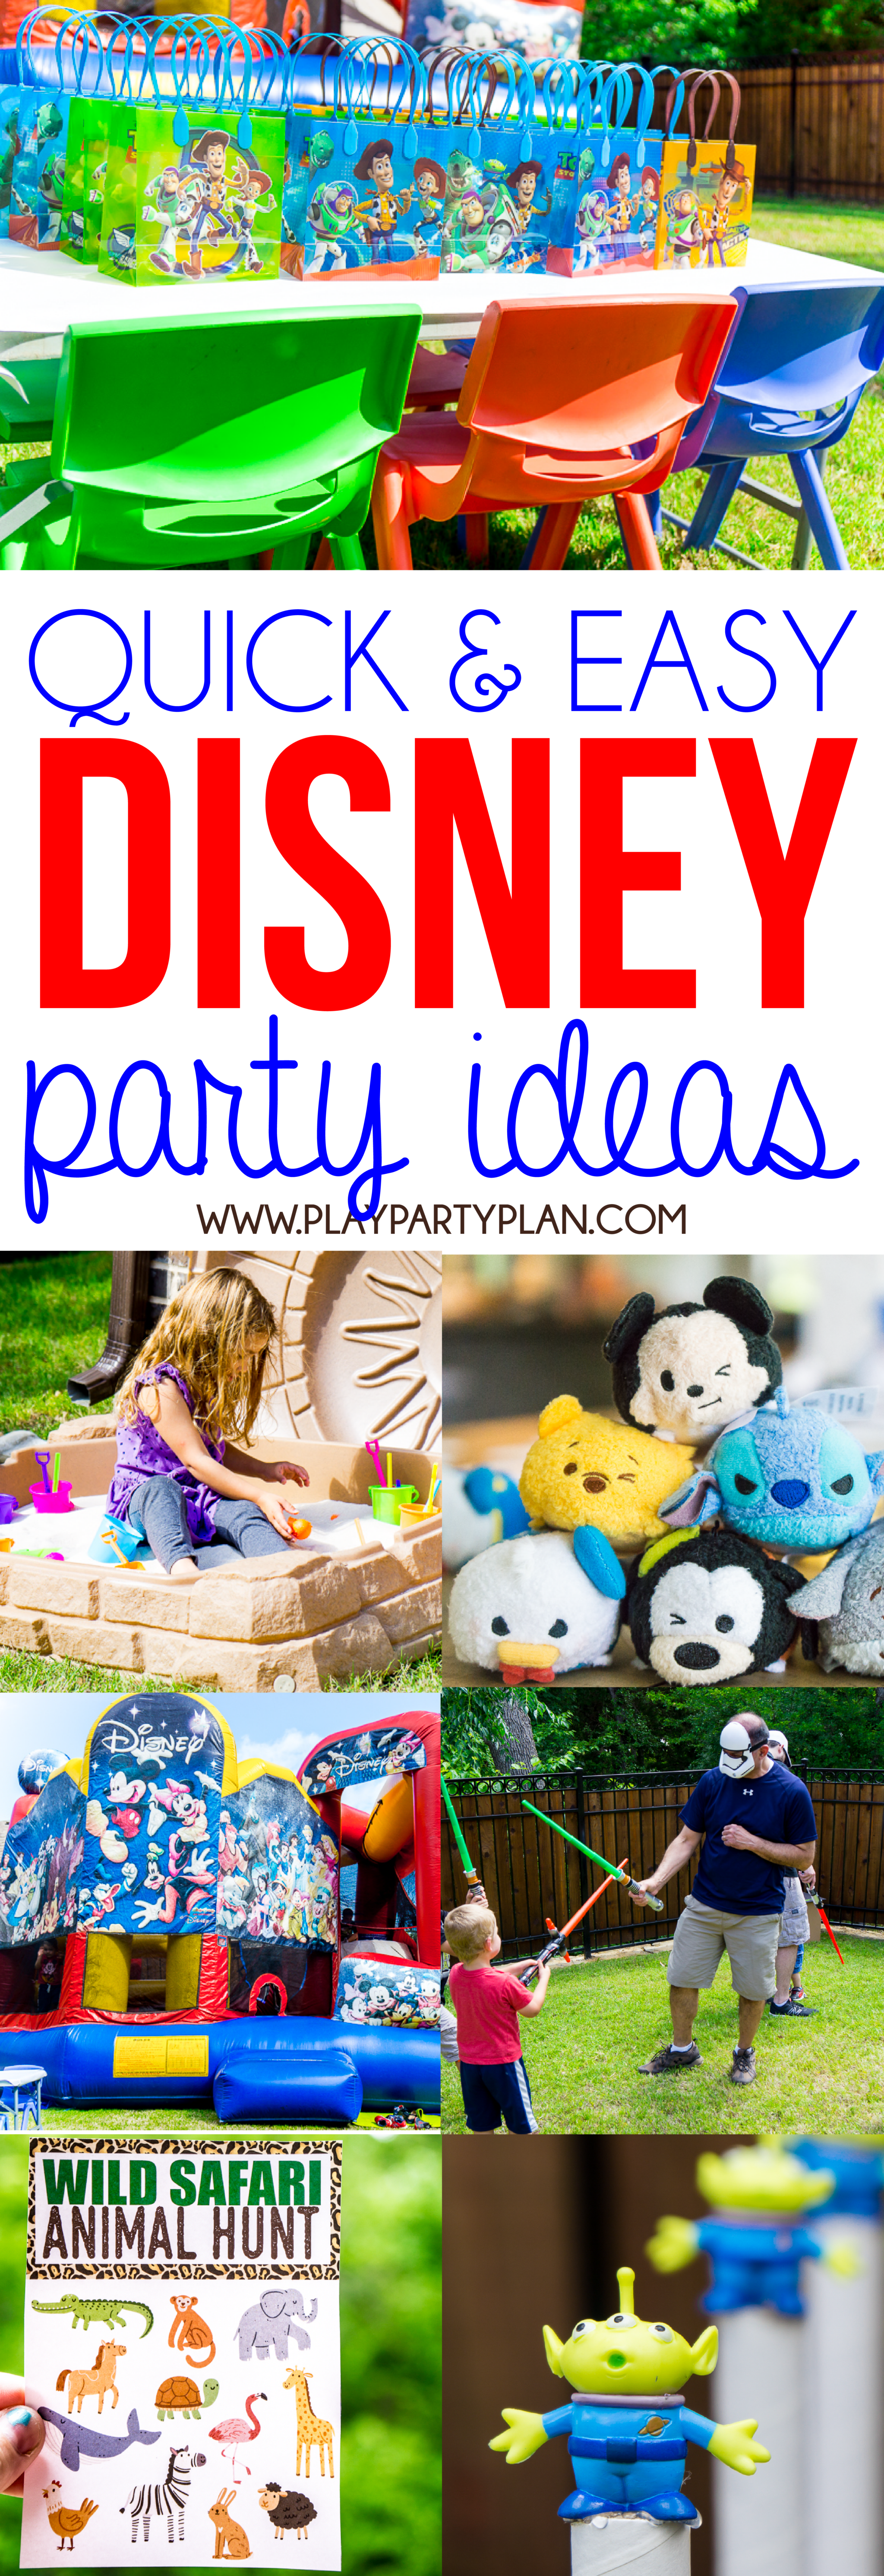 This awesome Disney party has tons of great ideas inspired by Disney World attractions and even a fully Epcot inspired food table! With DIY games, favors, even simple invitations, this is perfect for any little princess, boy, or even a grown up who loves Disney! Such a fun party theme!